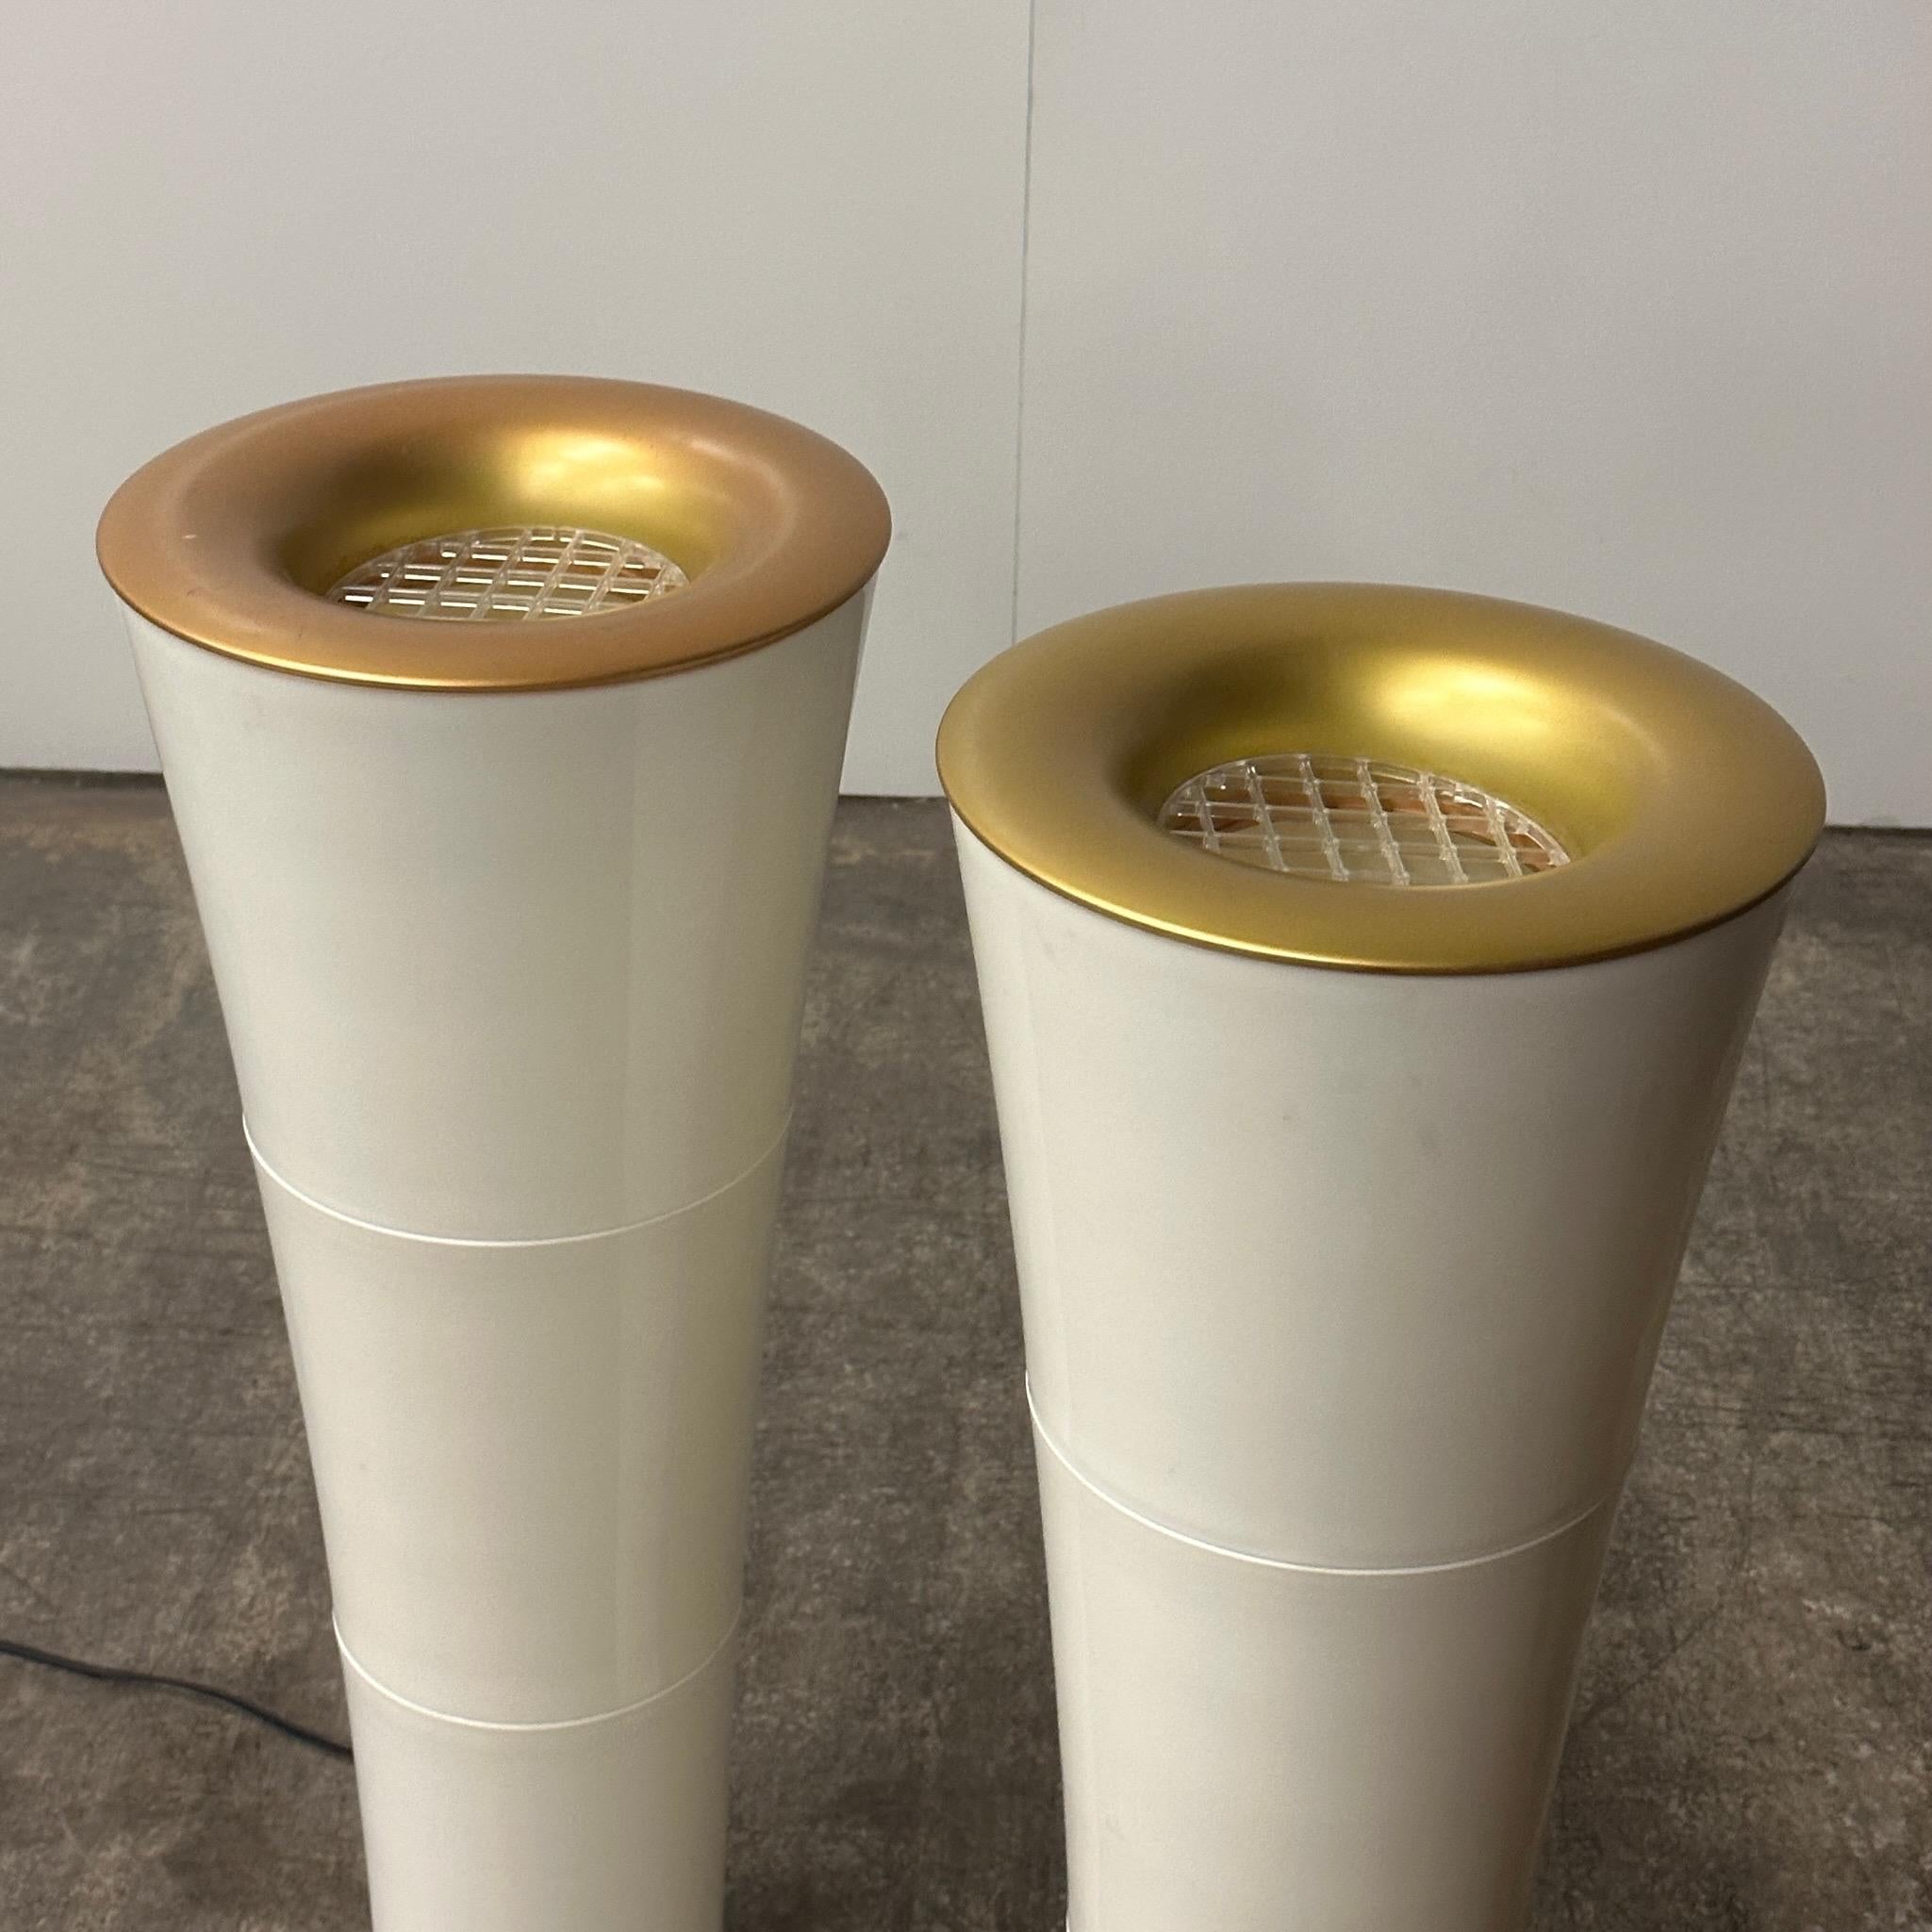 These petite torchieres emit an up light and feature white plastic bodies with gold plastic around the top opening of the lamp. The opening is covered with a clear plastic grate. The pair feature the original push toe dimmer switches. Made in